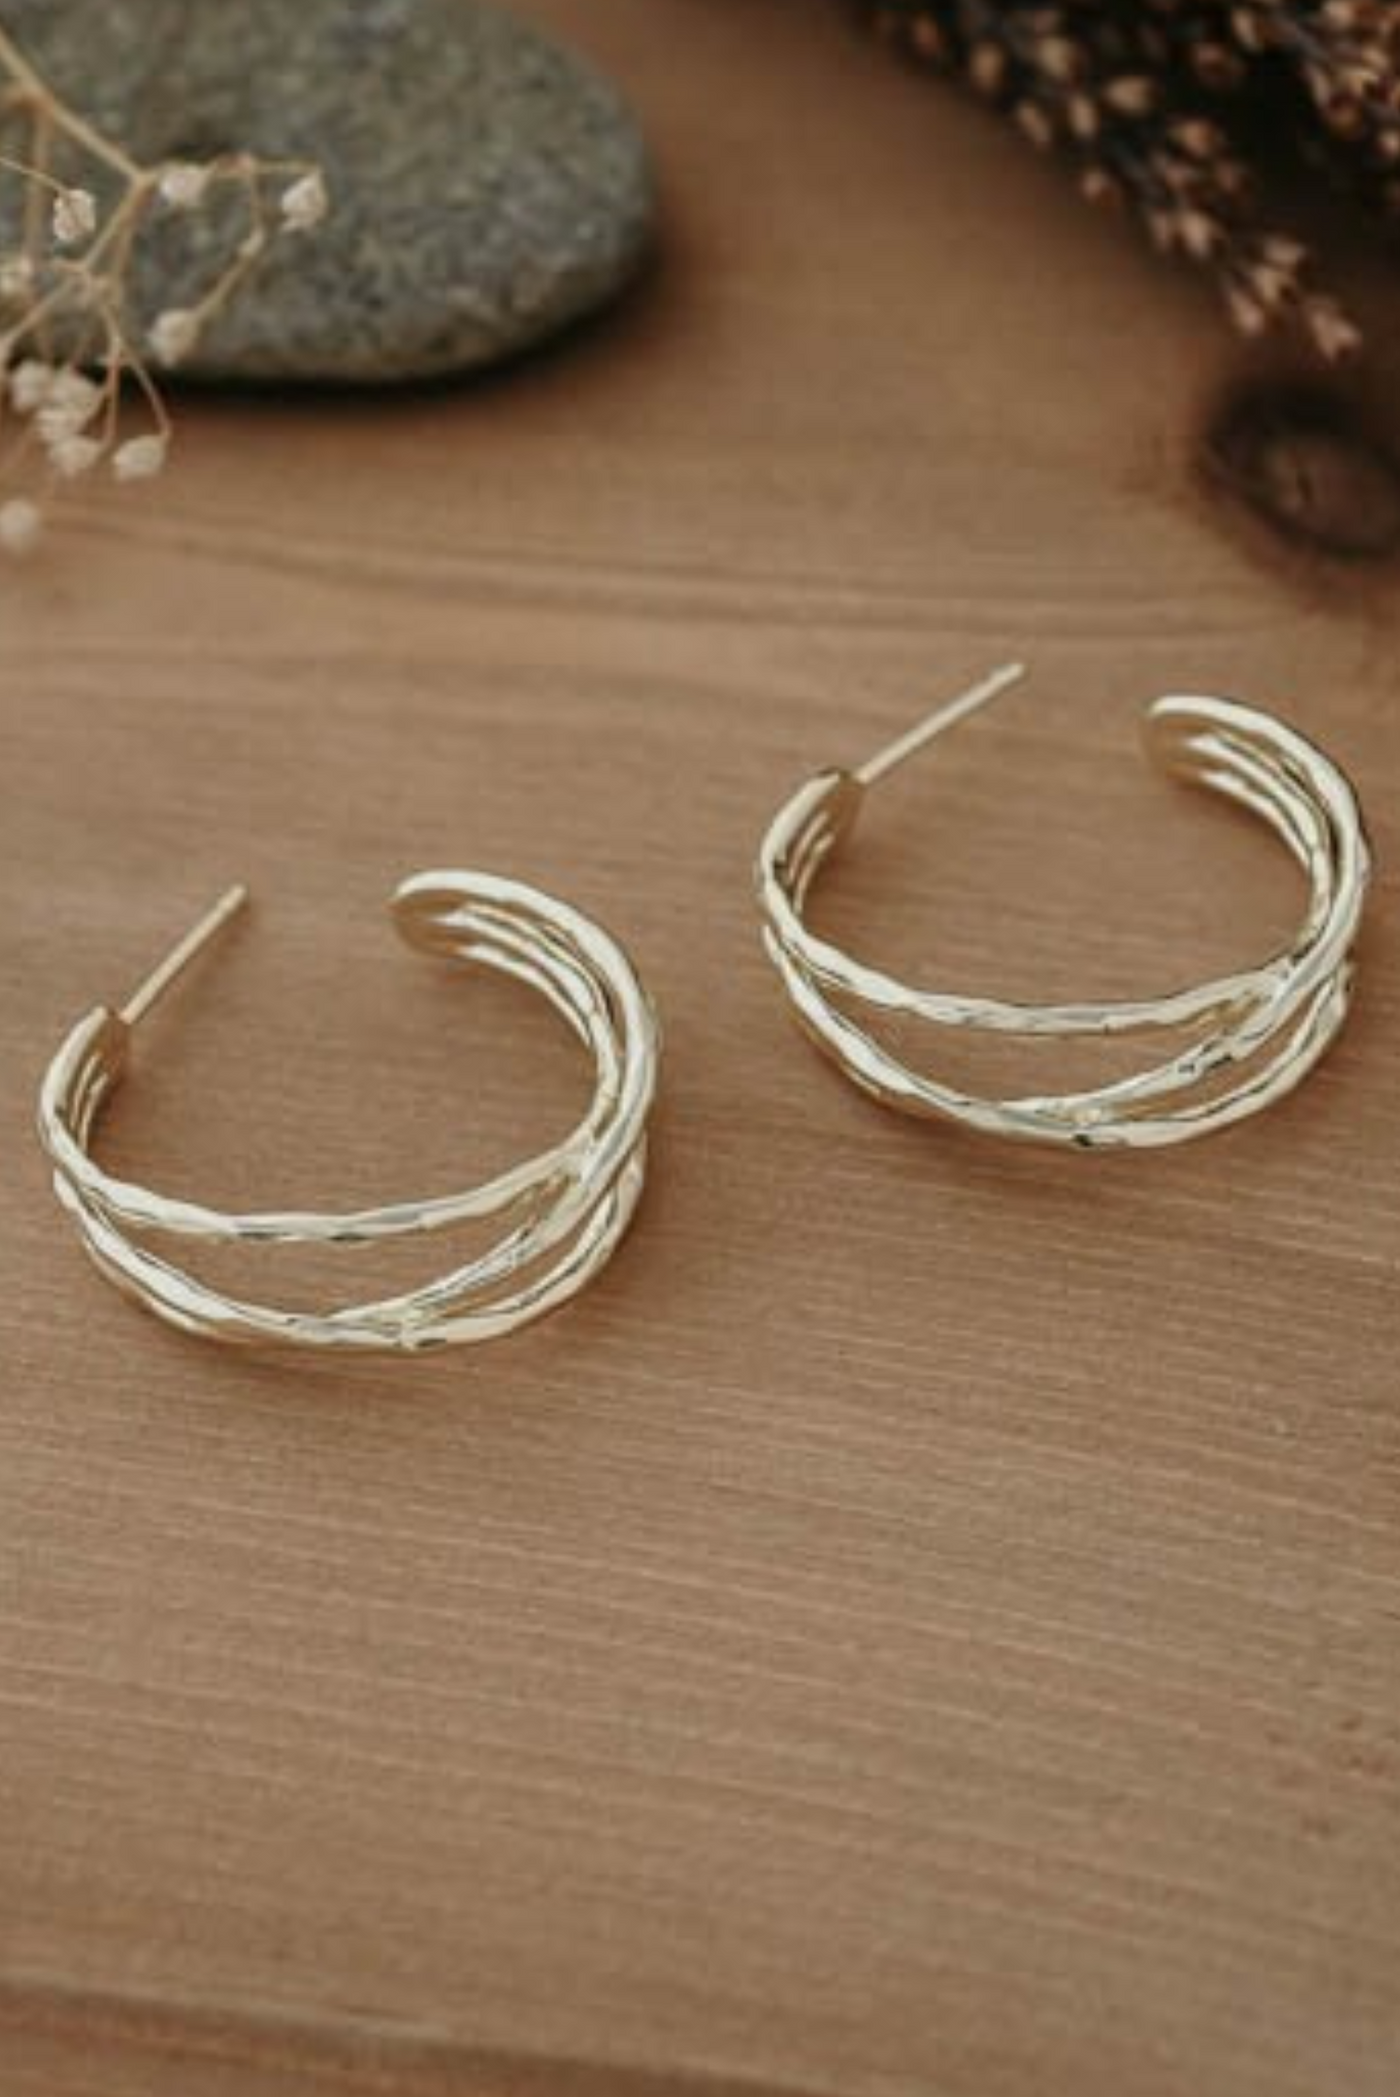 Entwined Hoops